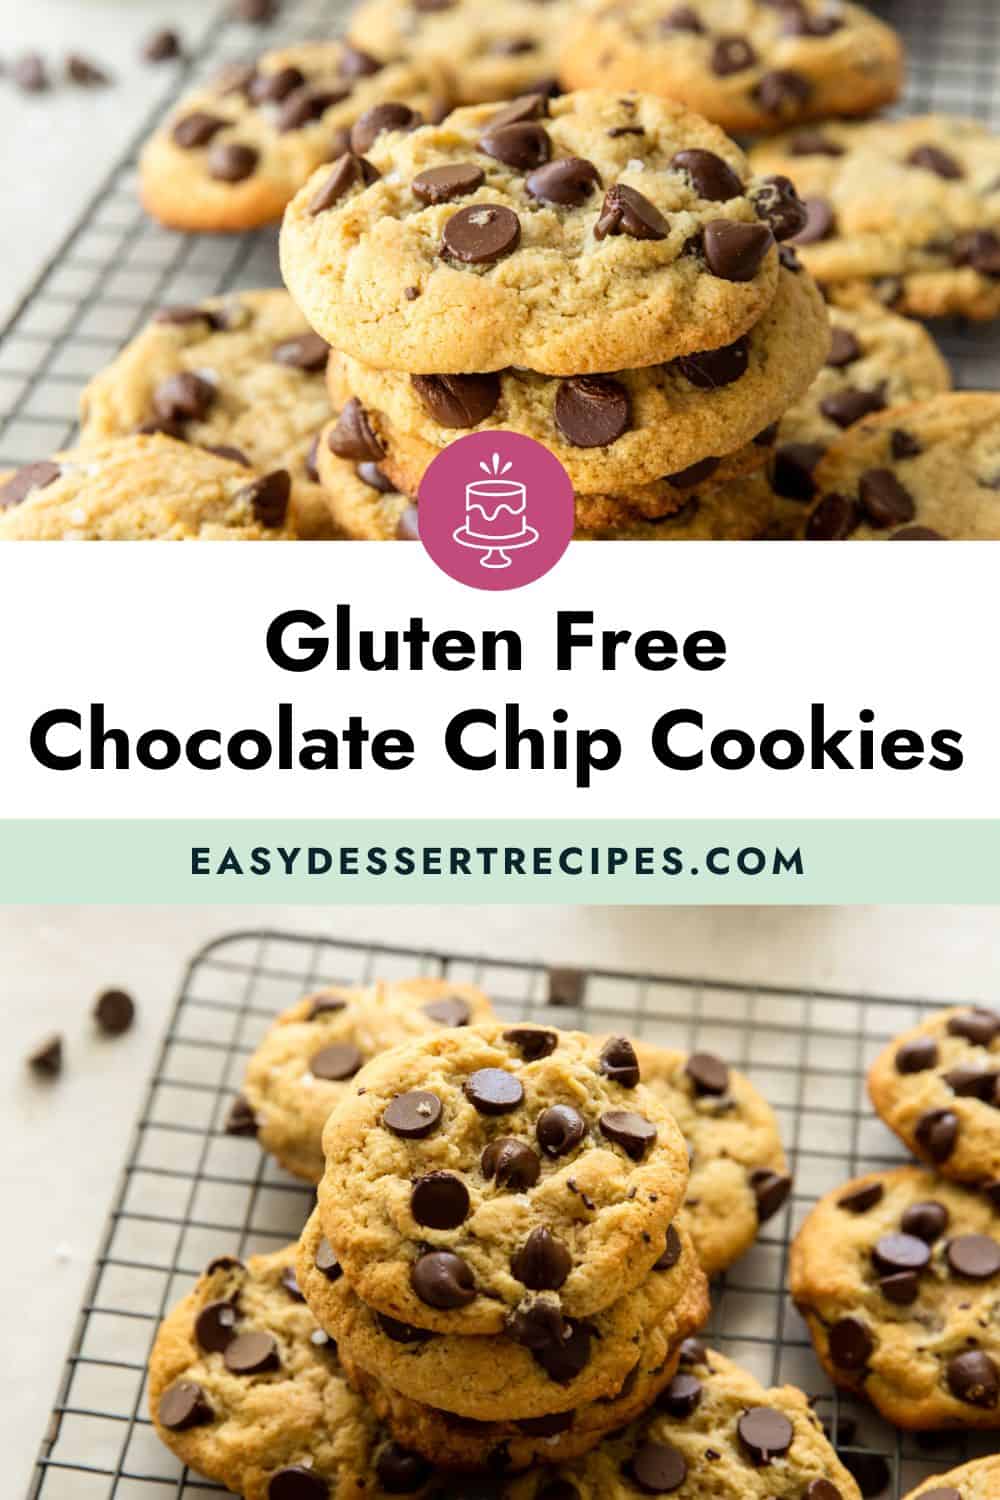 Gluten free chocolate chip cookies on a cooling rack.